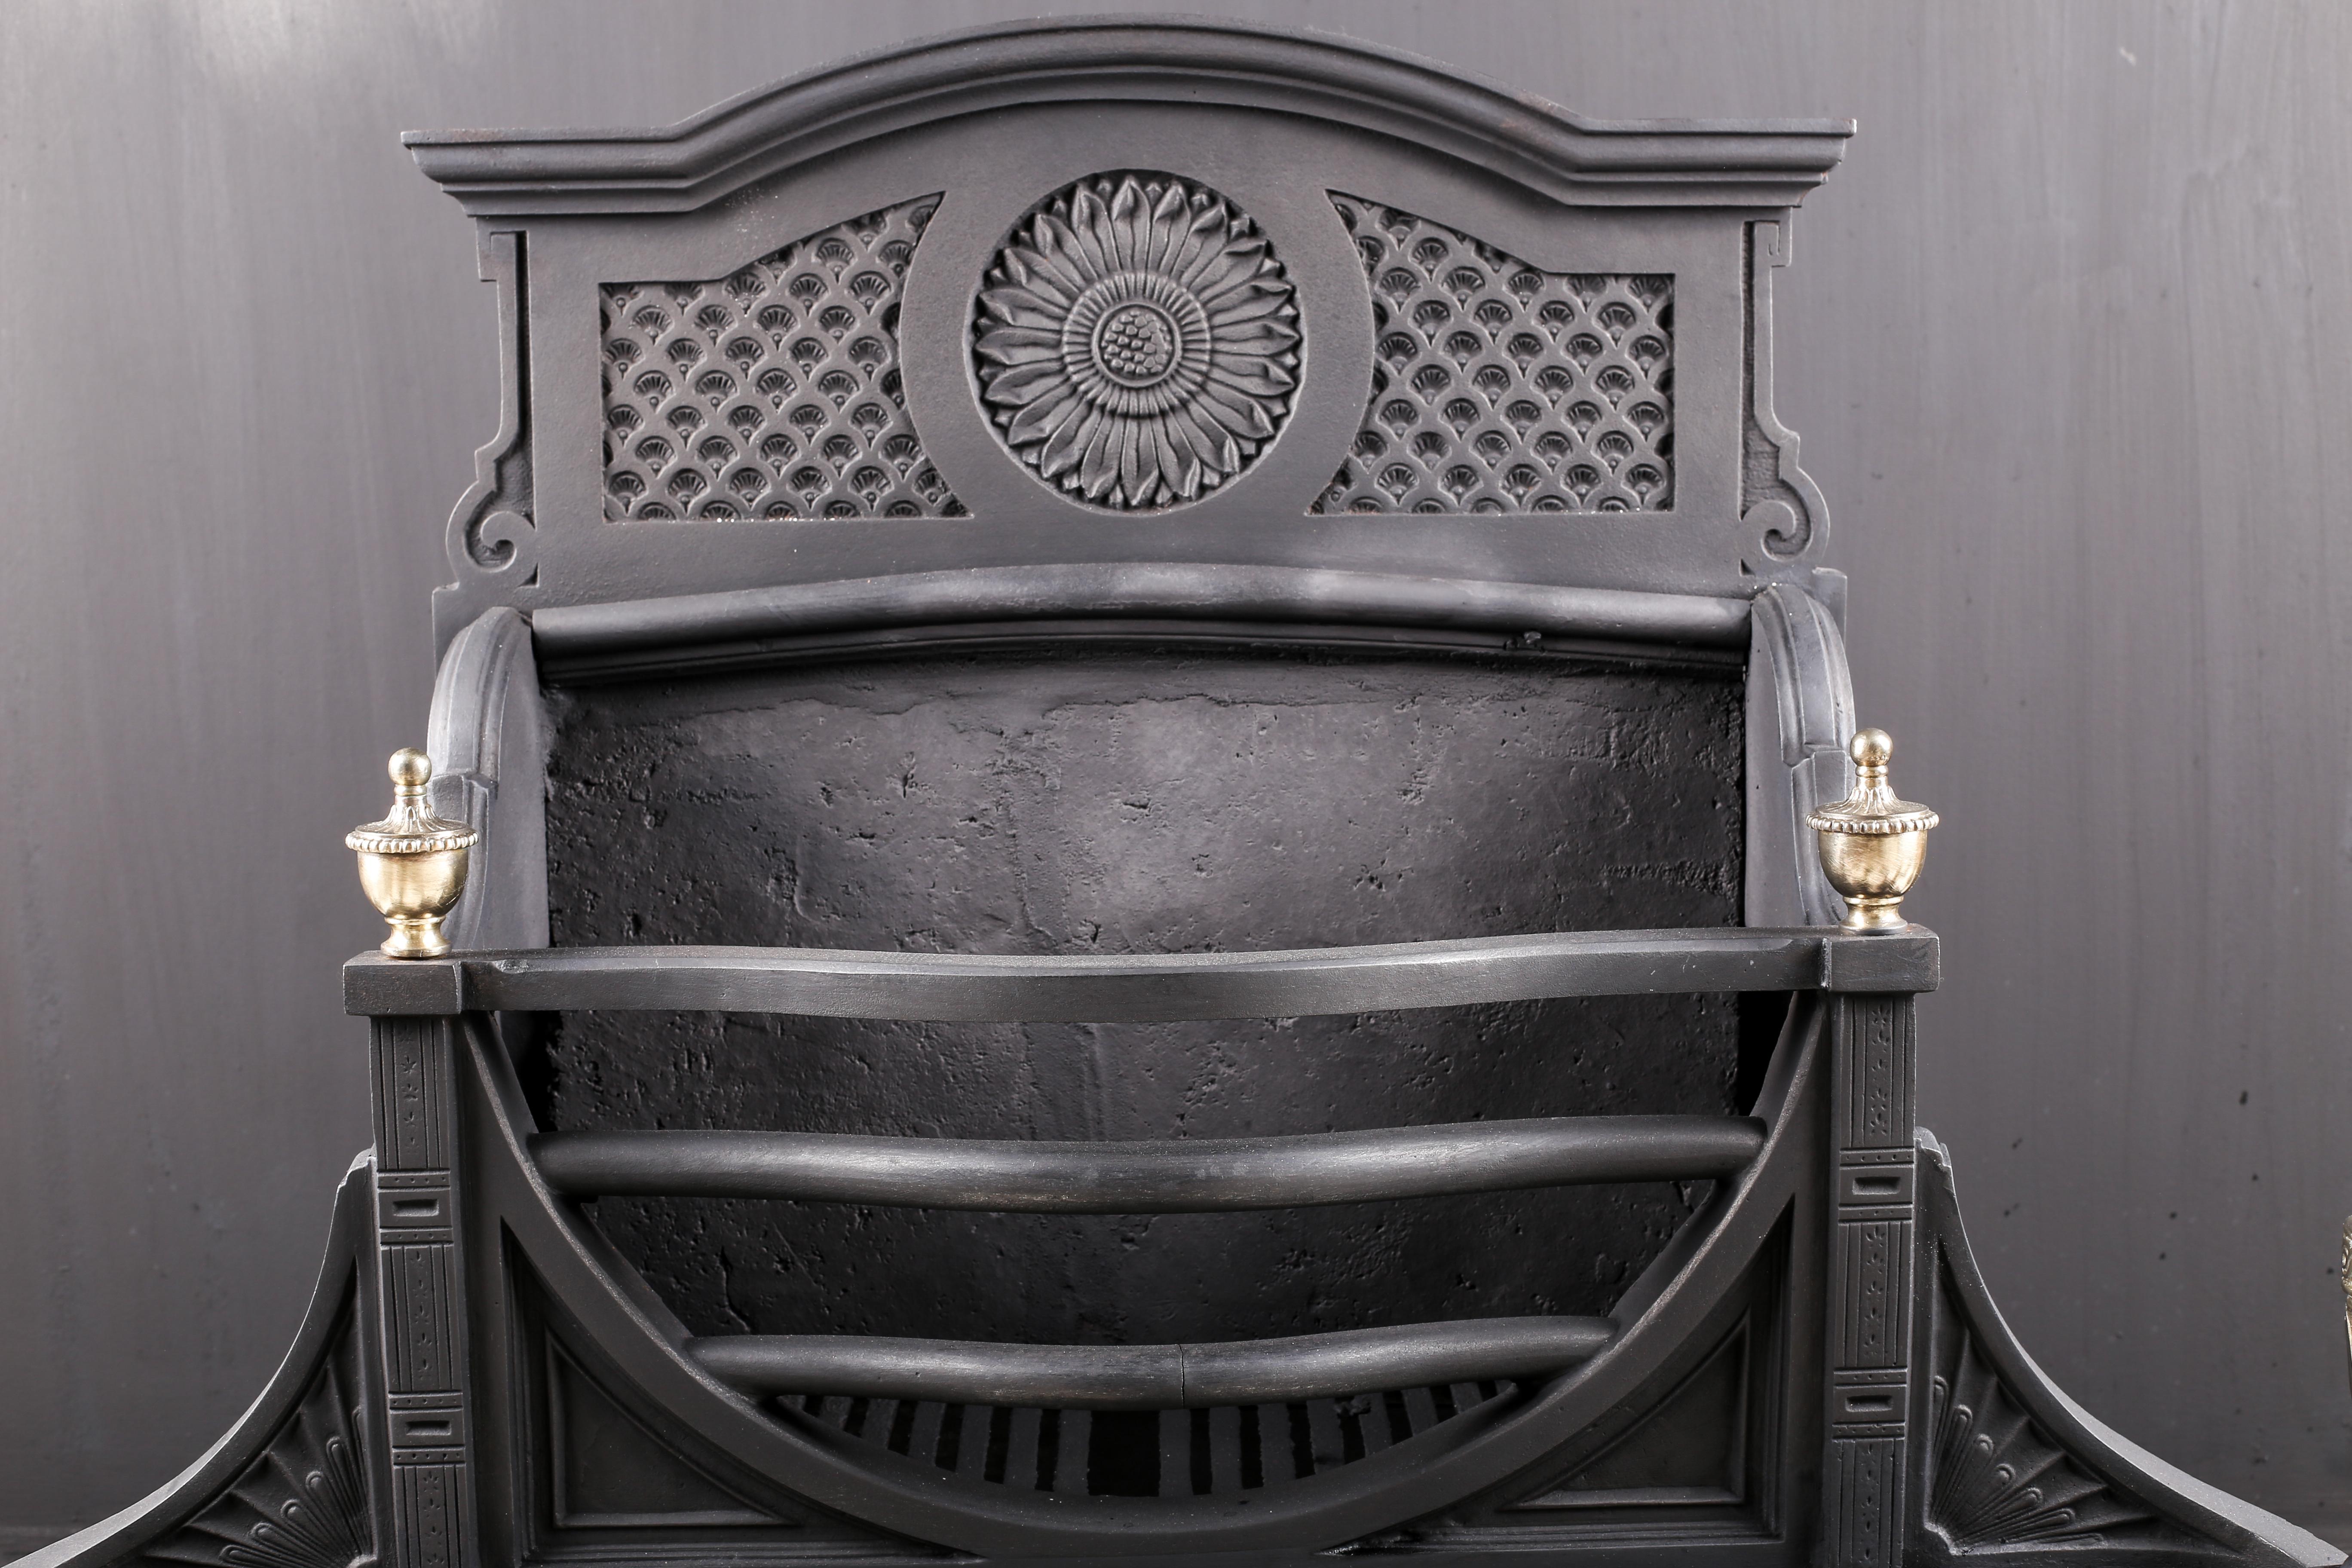 A substantial cast iron and brass late Georgian fire basket with a Sun Burst, English, circa 1870.

Measures: Depth 15